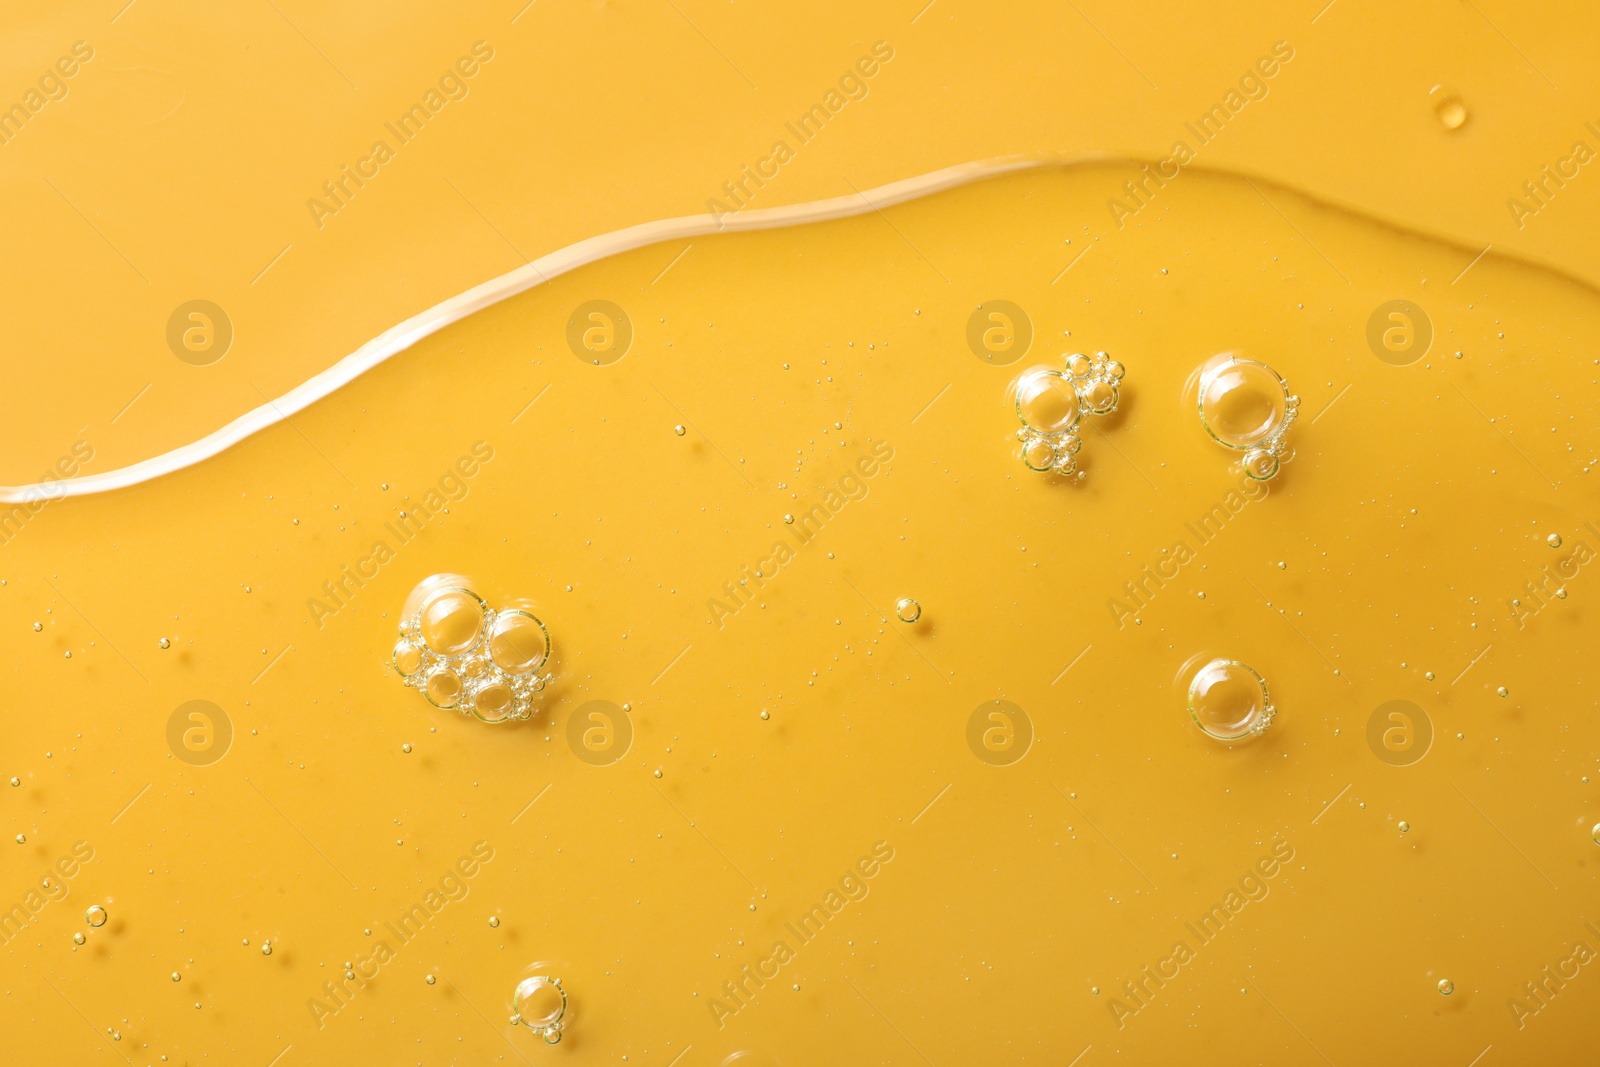 Photo of Sample of hydrophilic oil on orange background, top view